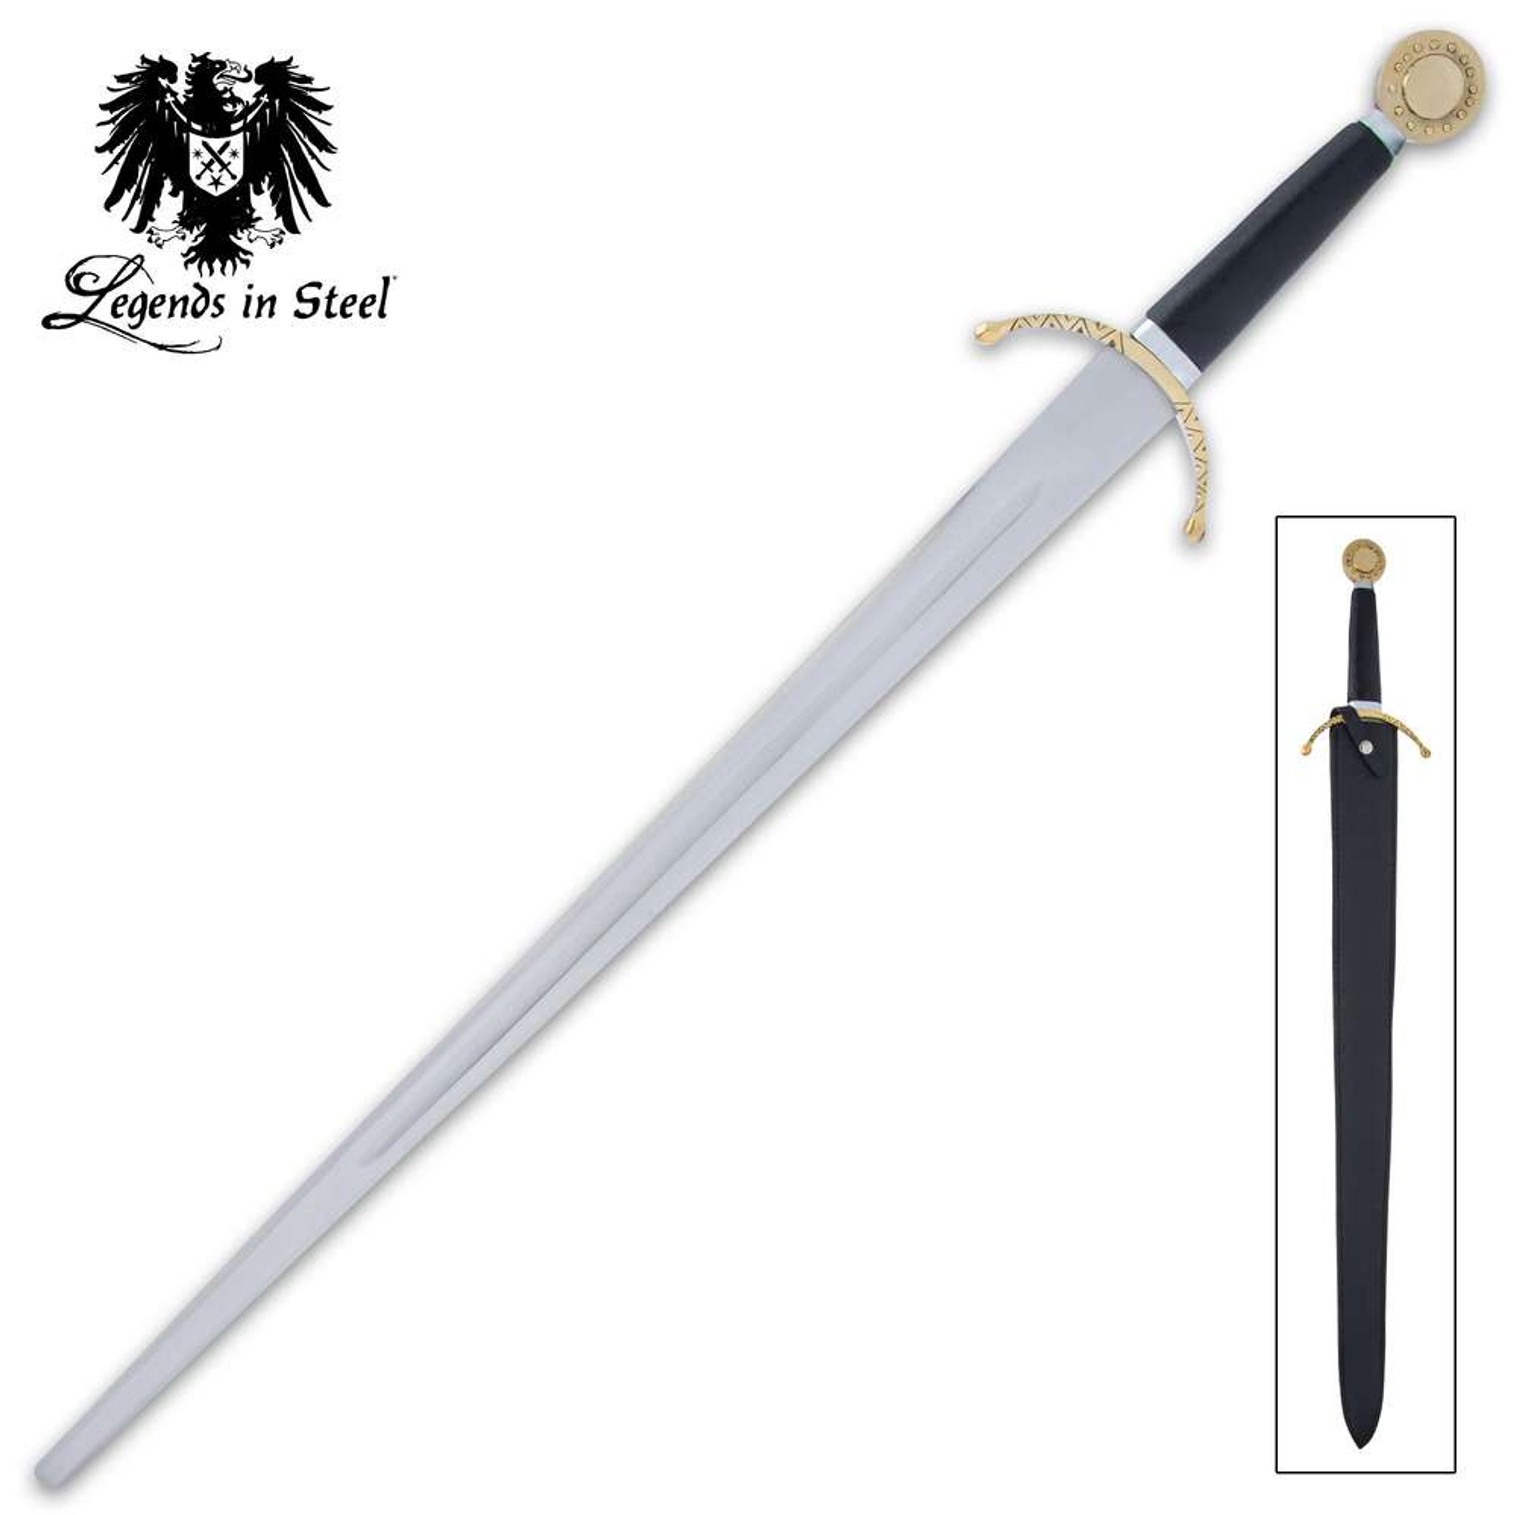 Legends In Steel Medieval Great Sword And Scabbard